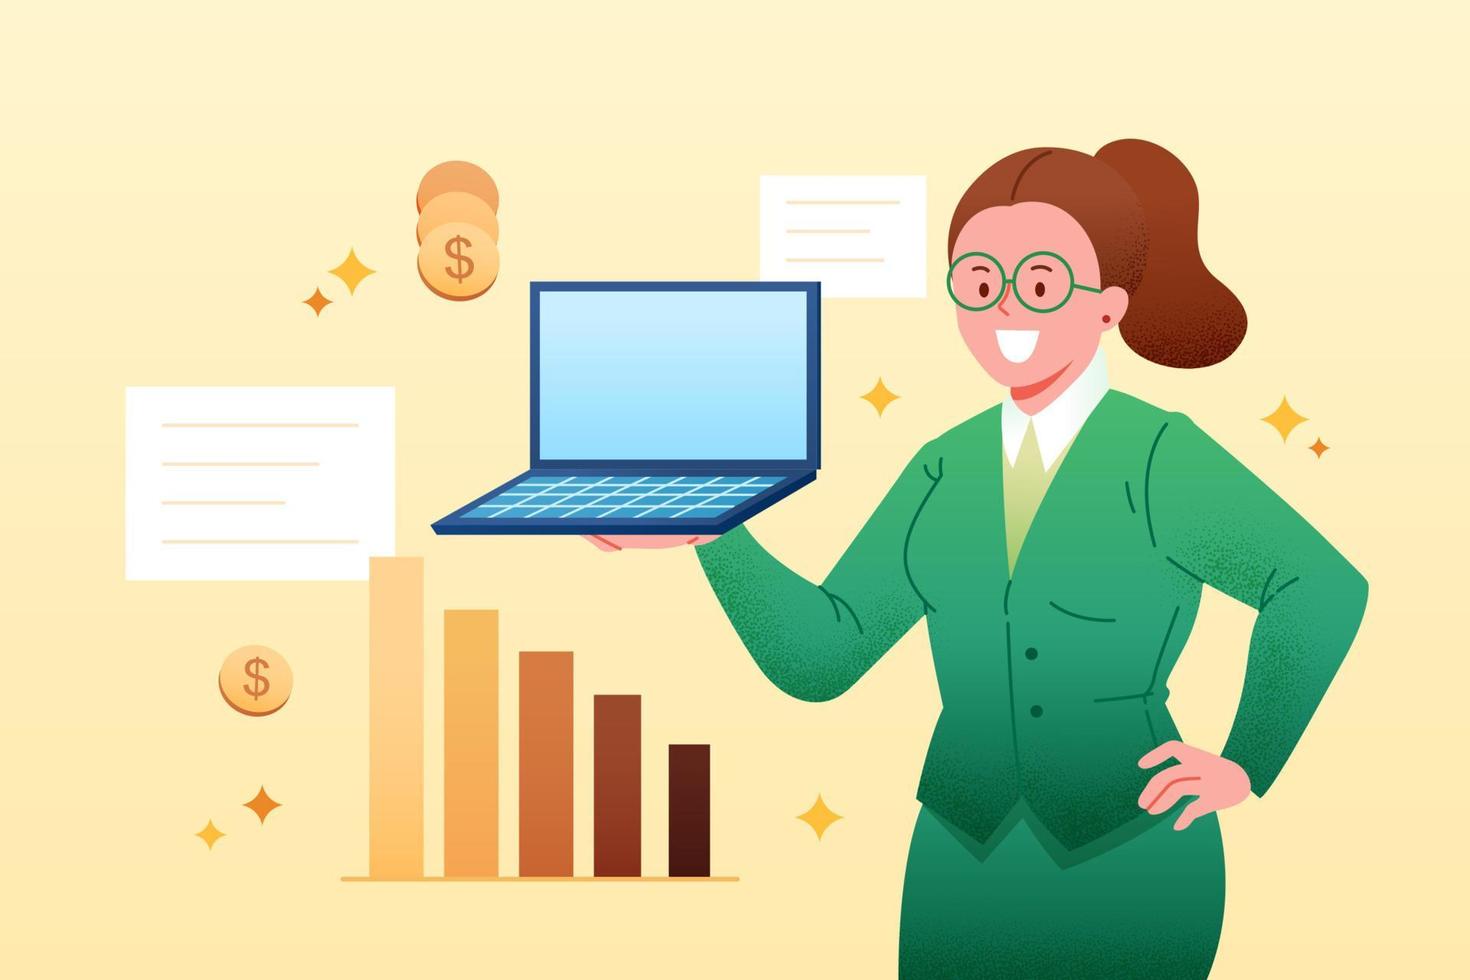 Flat illustration of a businesswoman holding laptop with bar graph, dollars, and reports on light yellow background. vector